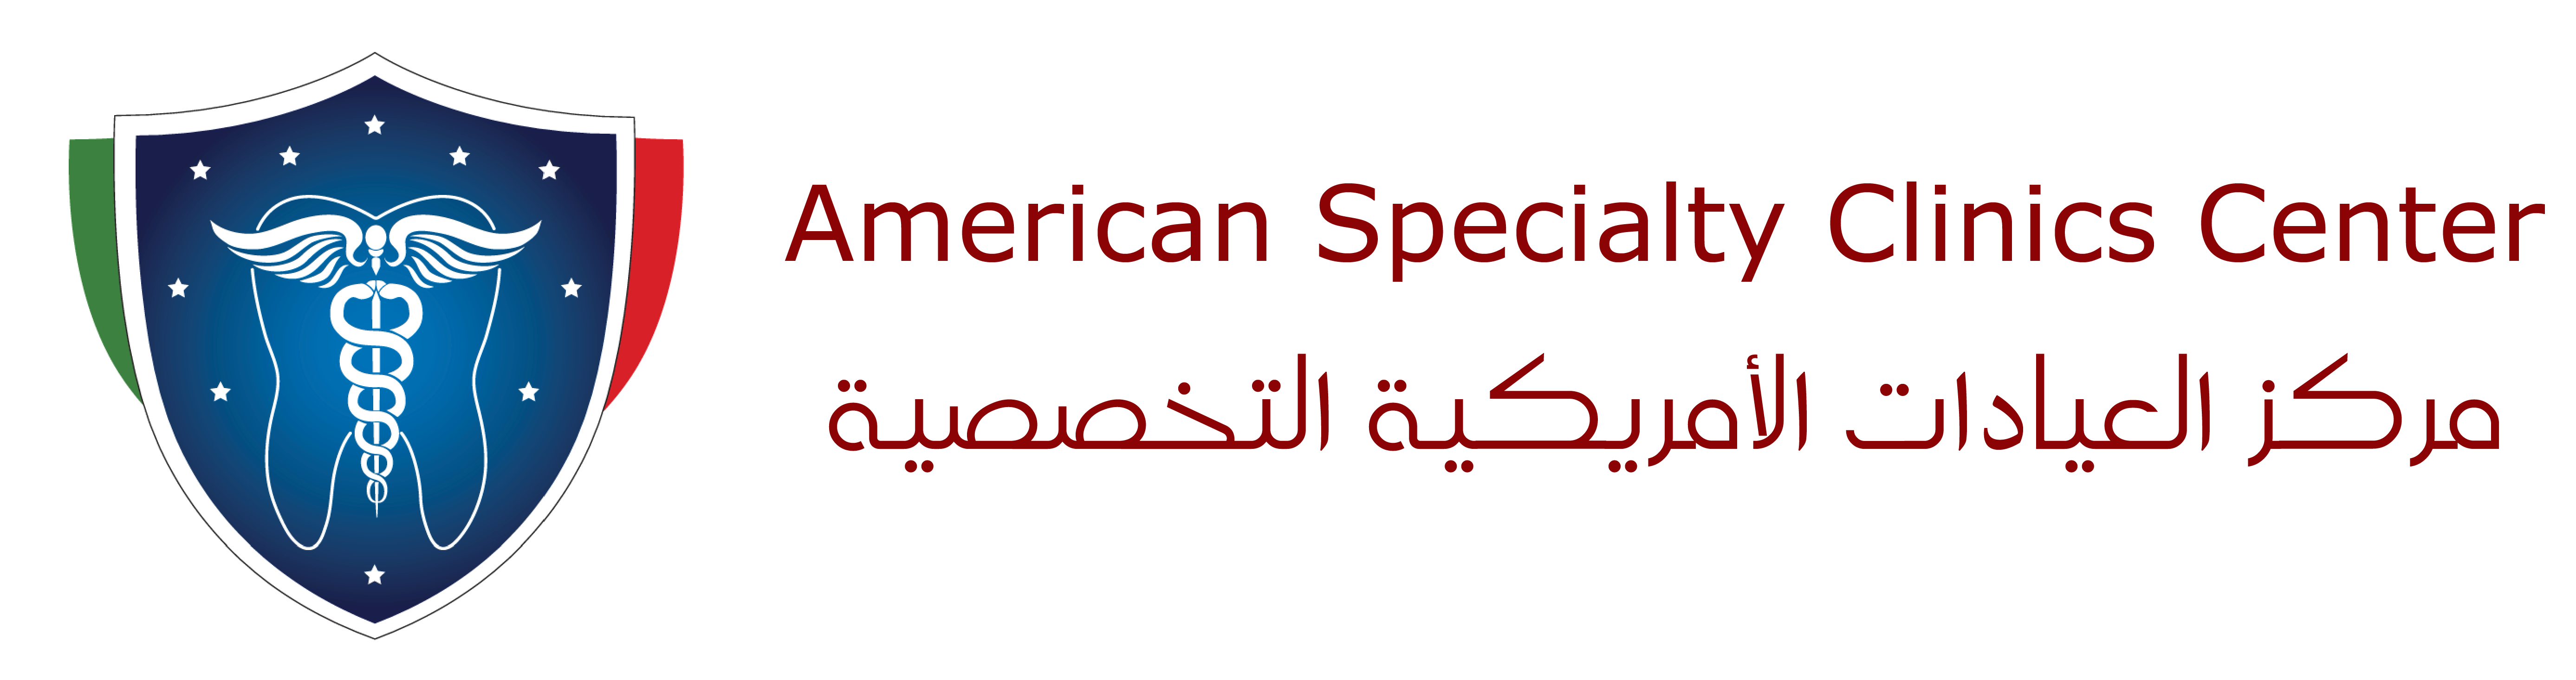 AMERICAN SPECIALTY CLINICS CENTER